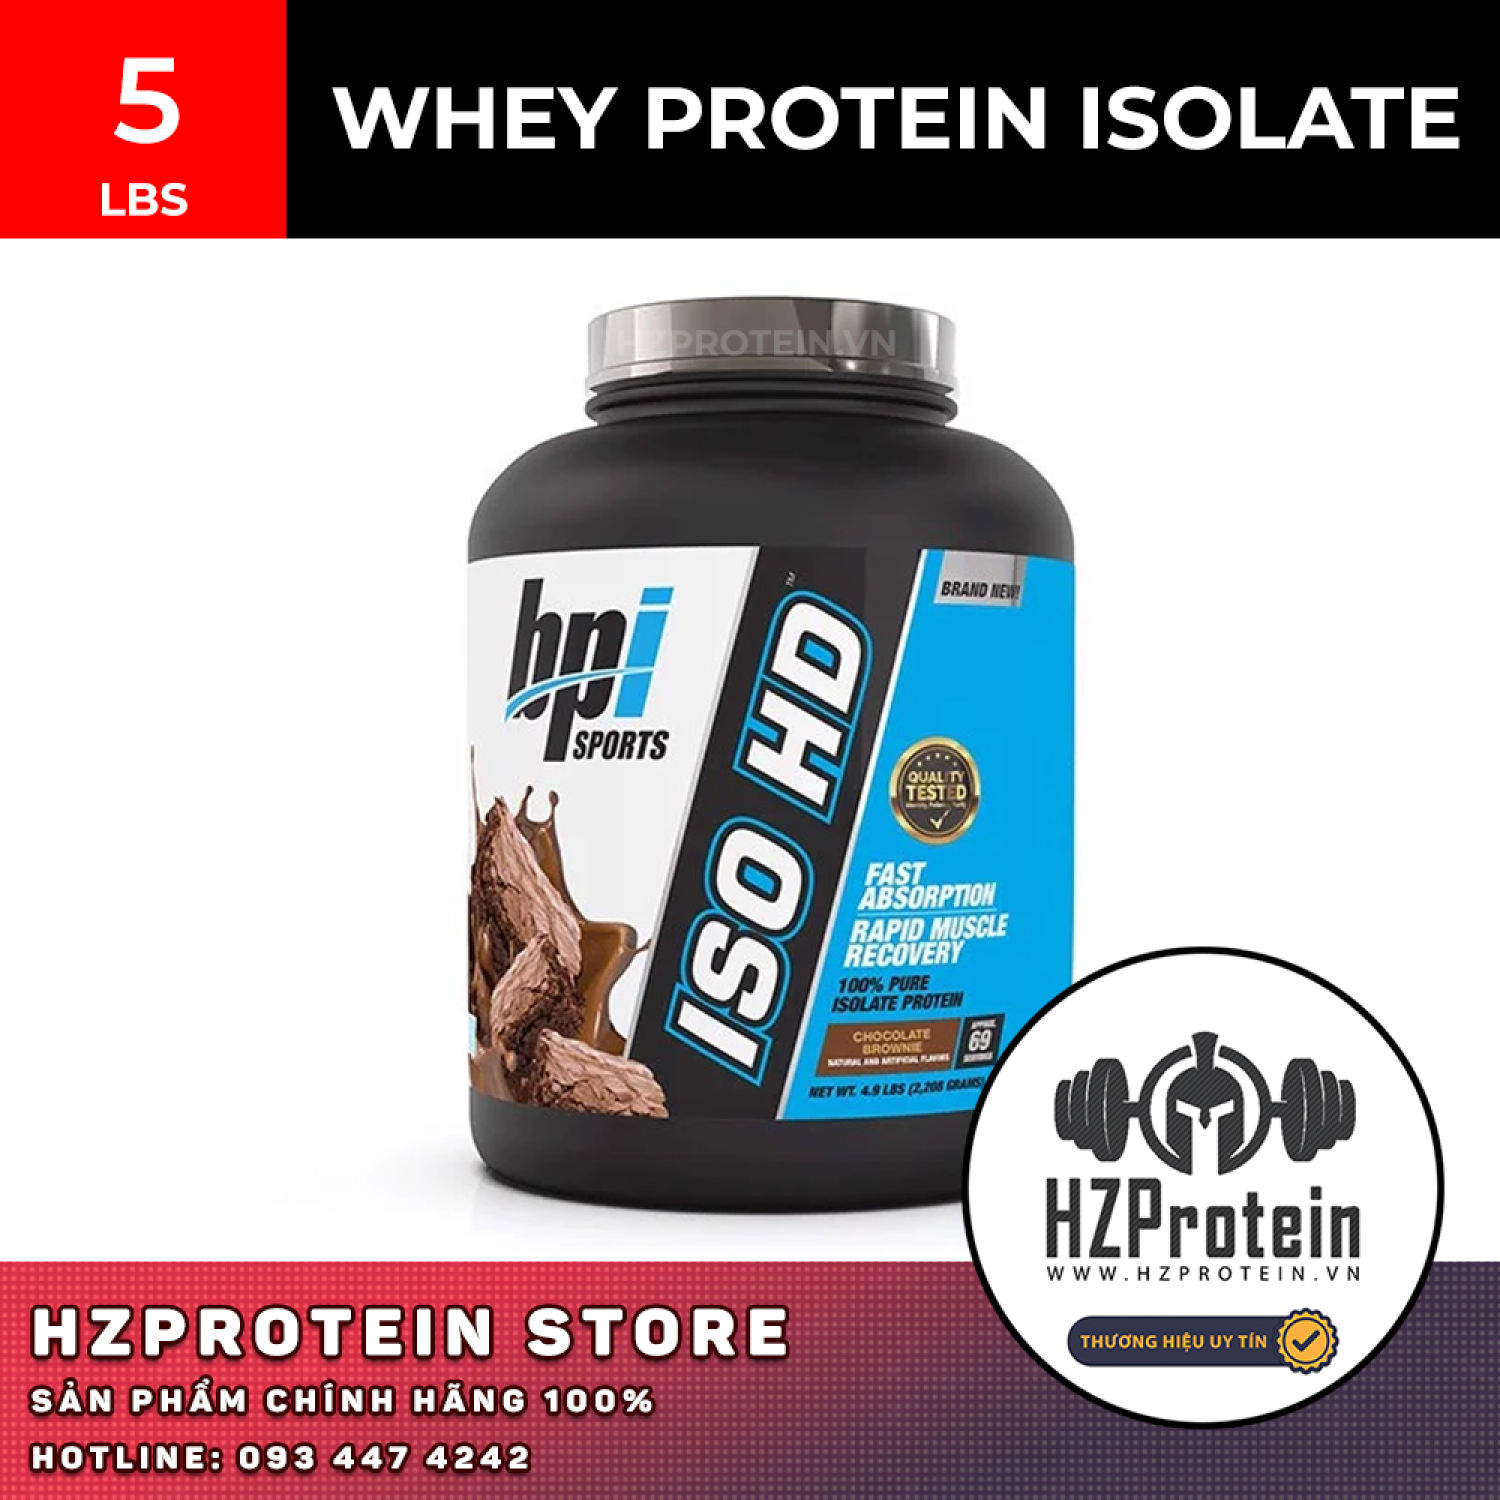 ISO HD ISOLATE WHEY - MUSCLE-BUILDING PROTEIN POWDER SUPPLEMENT 5 LBS